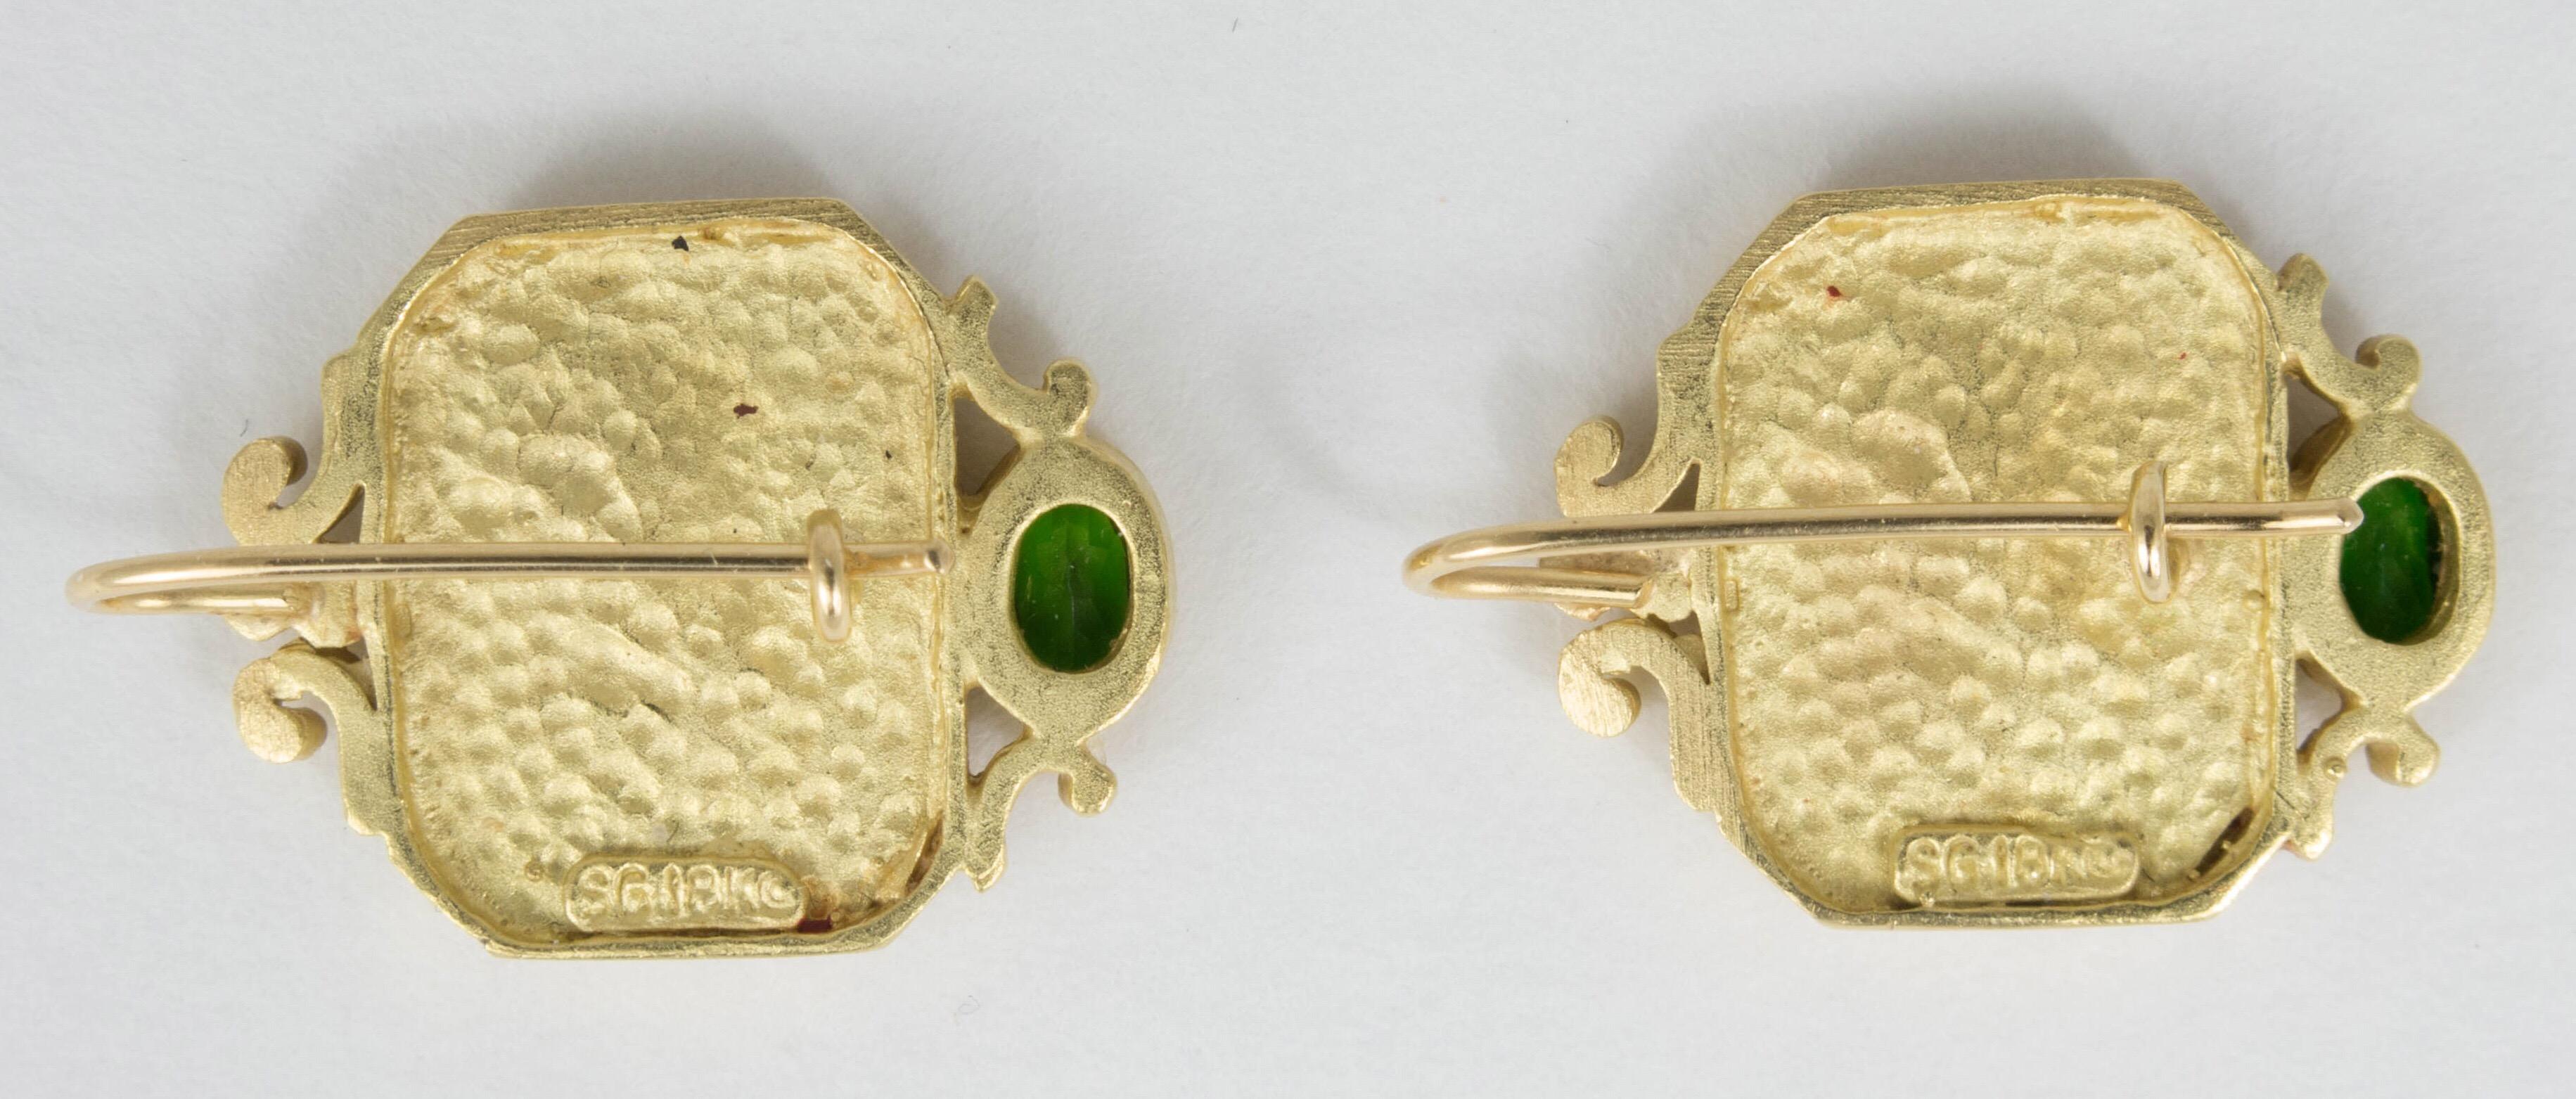 Greek Revival SeidenGang Athena Earrings in 18k Yellow Gold with Green Tourmaline